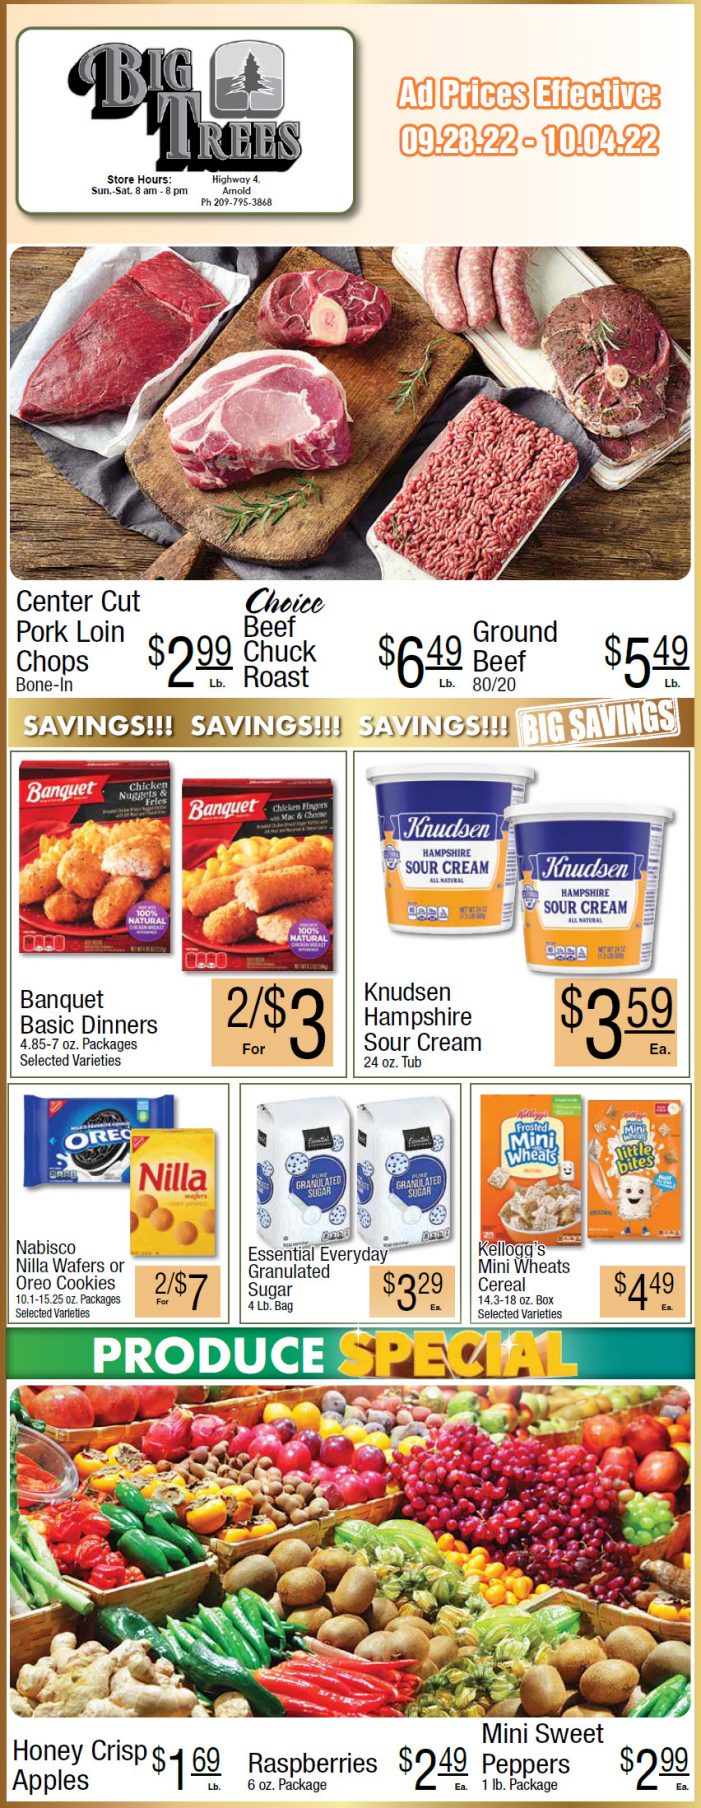 Big Trees Market Weekly Ad & Grocery Specials Sept 28 – October 4th!  Shop Local & Save!!